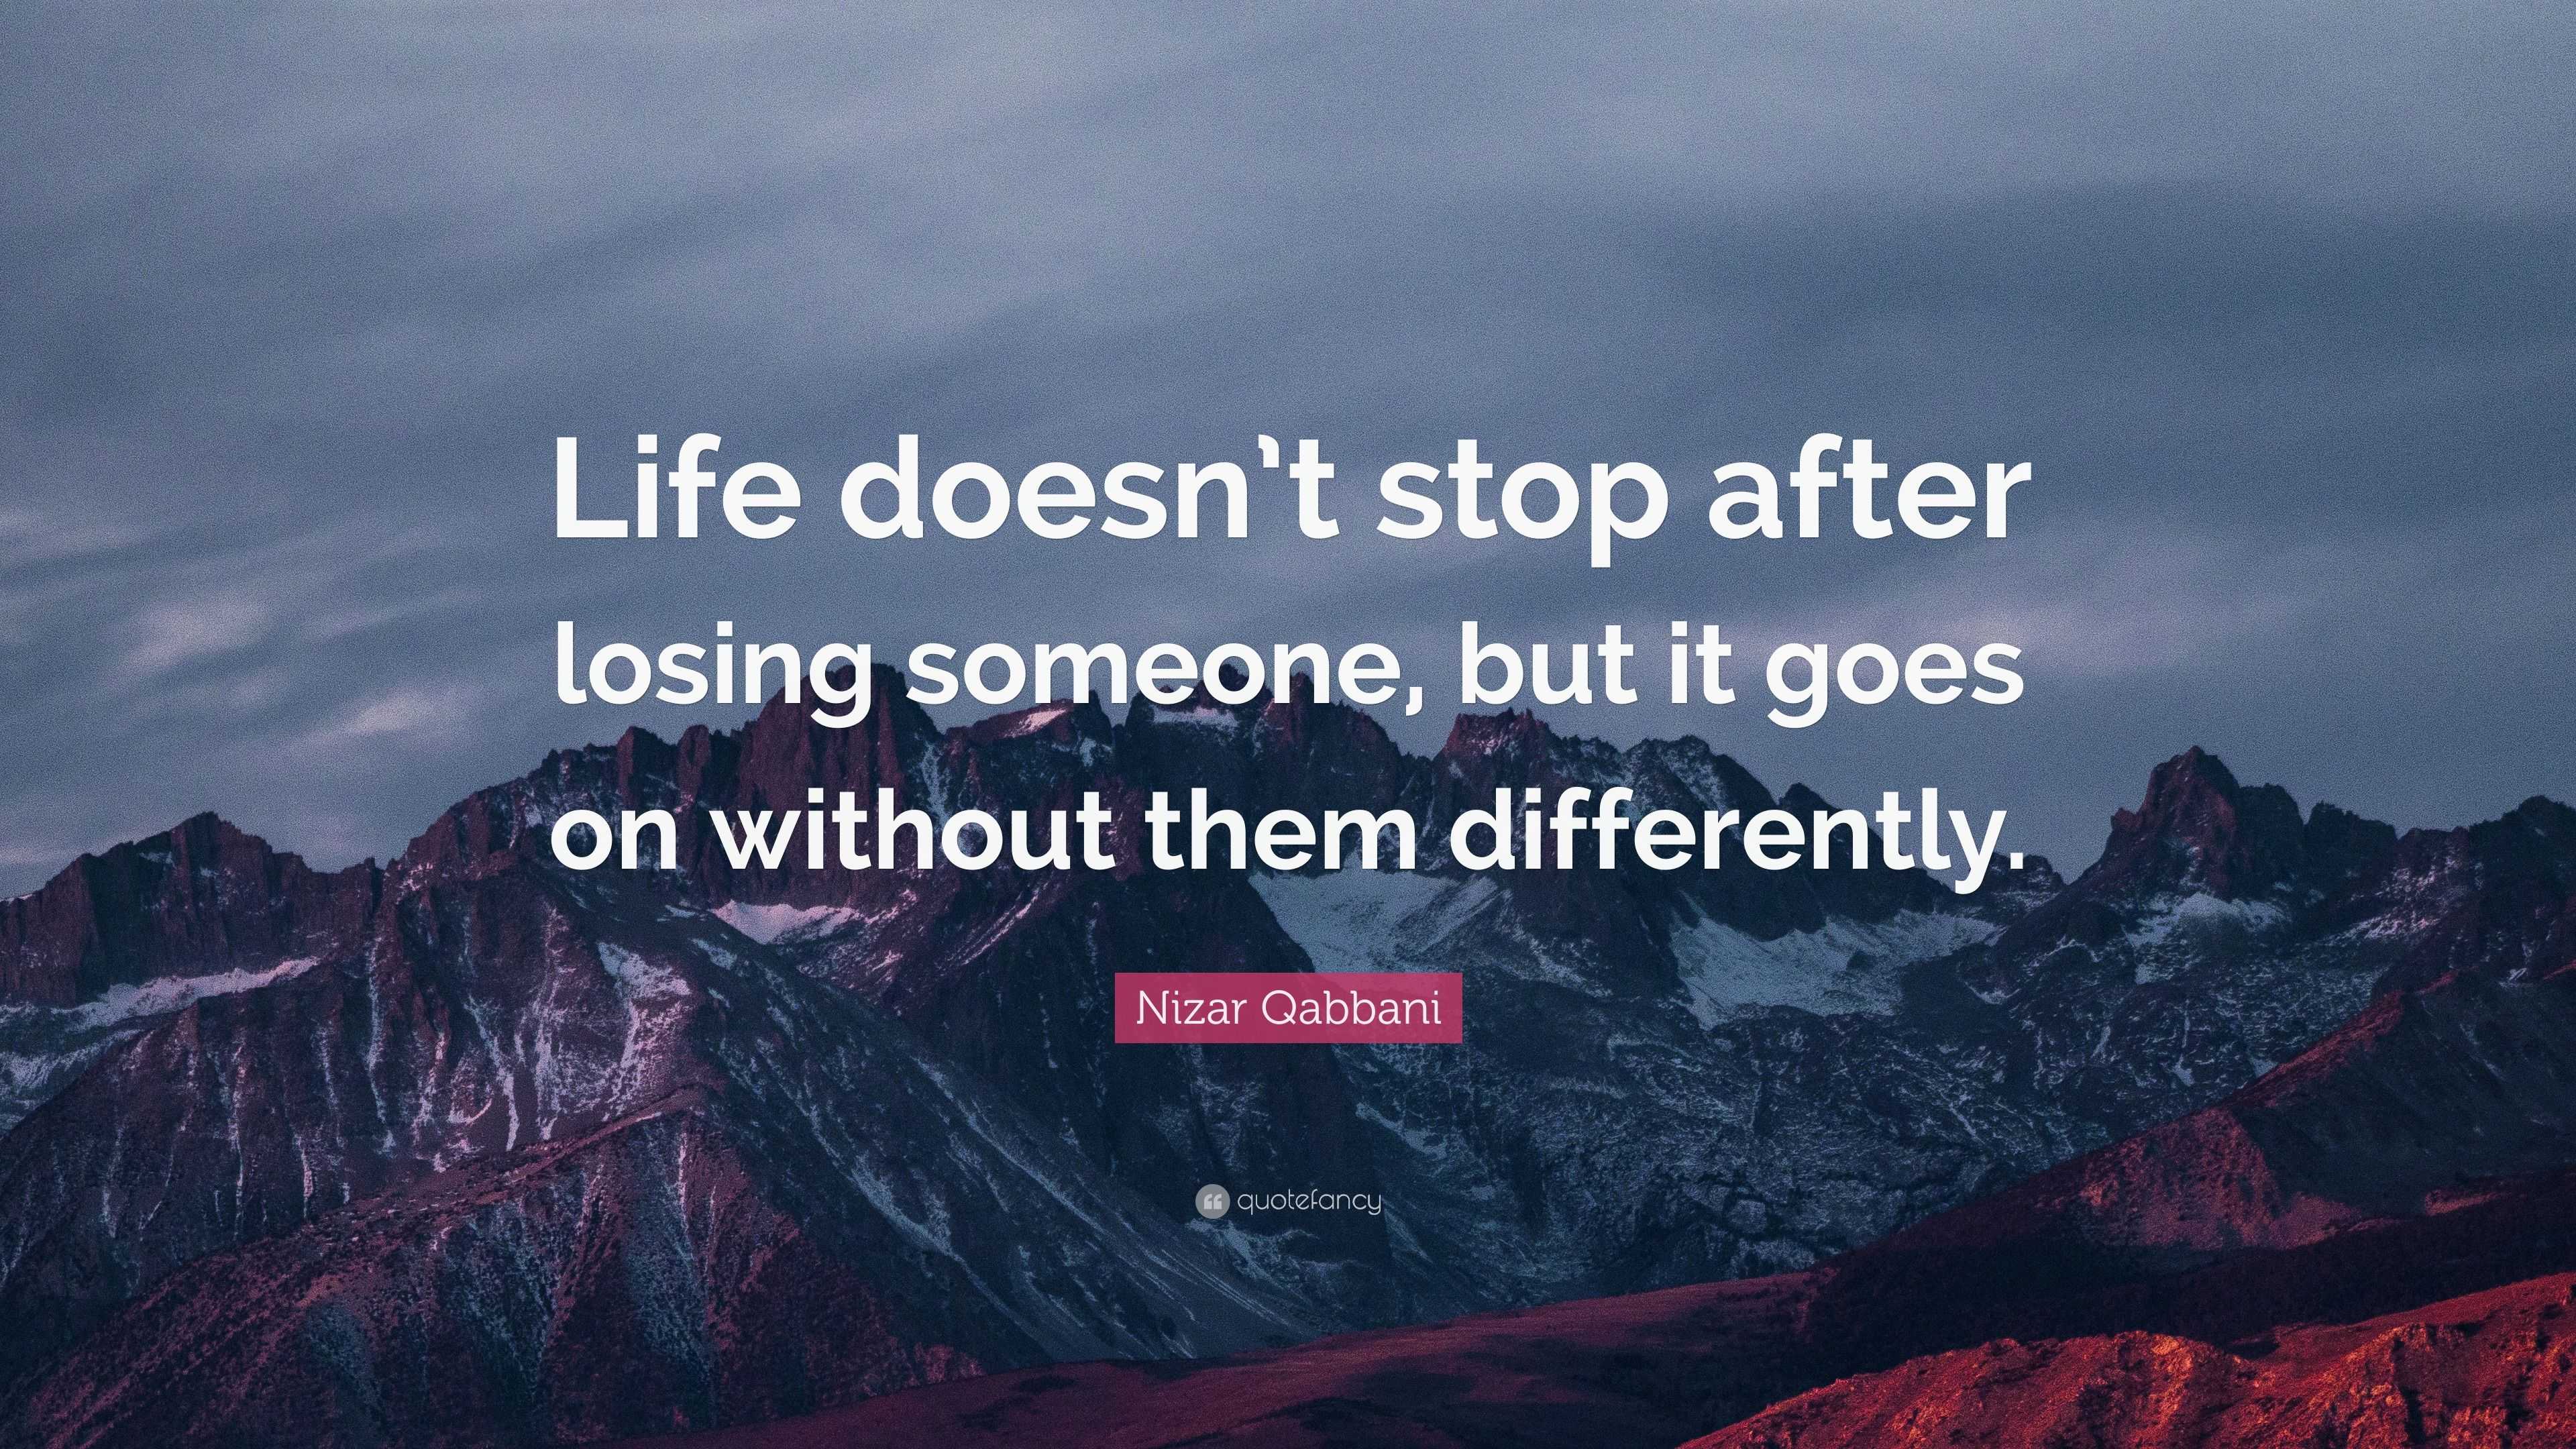 Nizar Qabbani Quote: “Life doesn’t stop after losing someone, but it ...